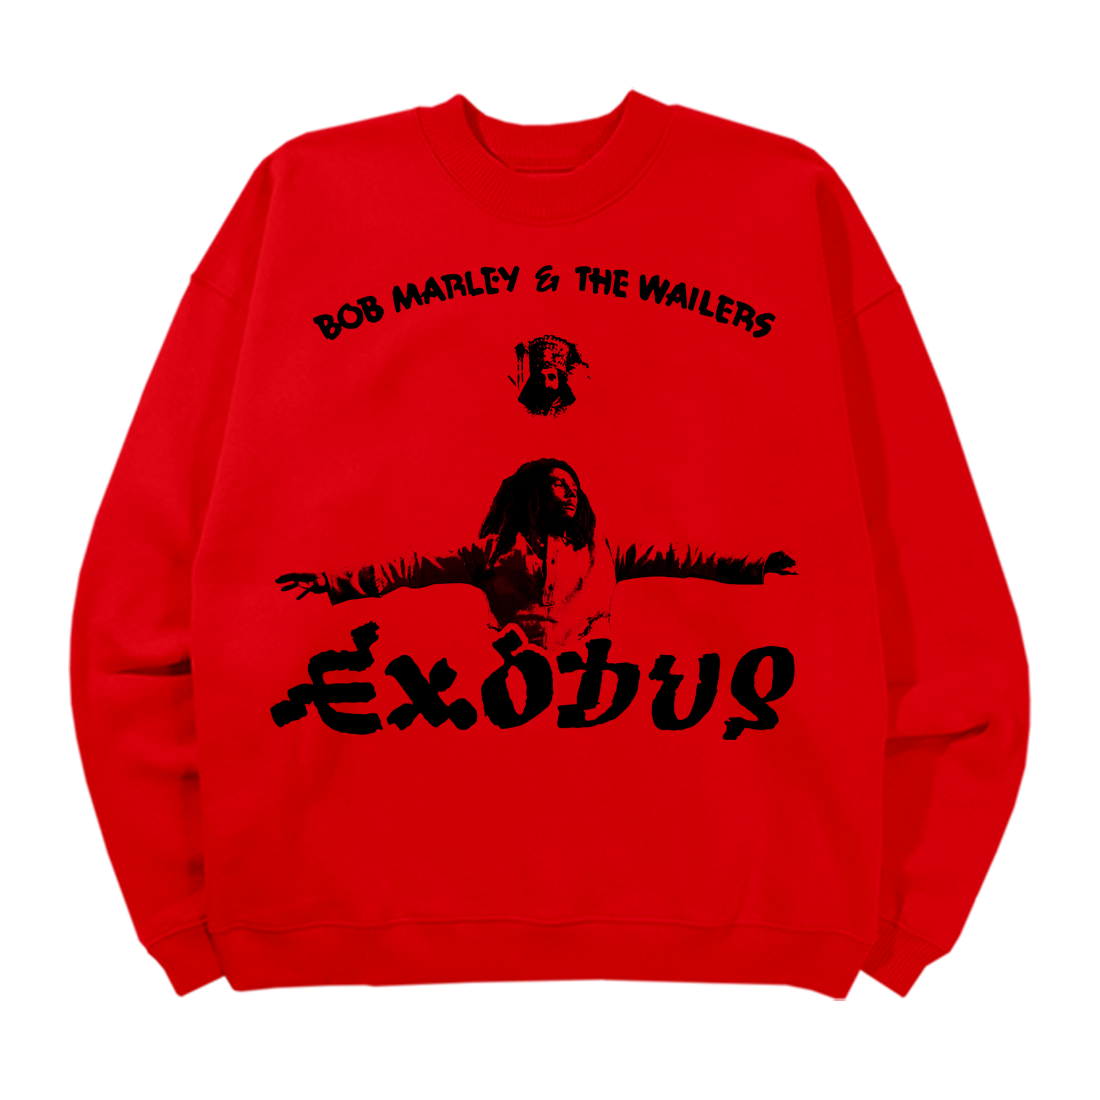 Bob Marley - Official Store - Shop Exclusive Music & Merch